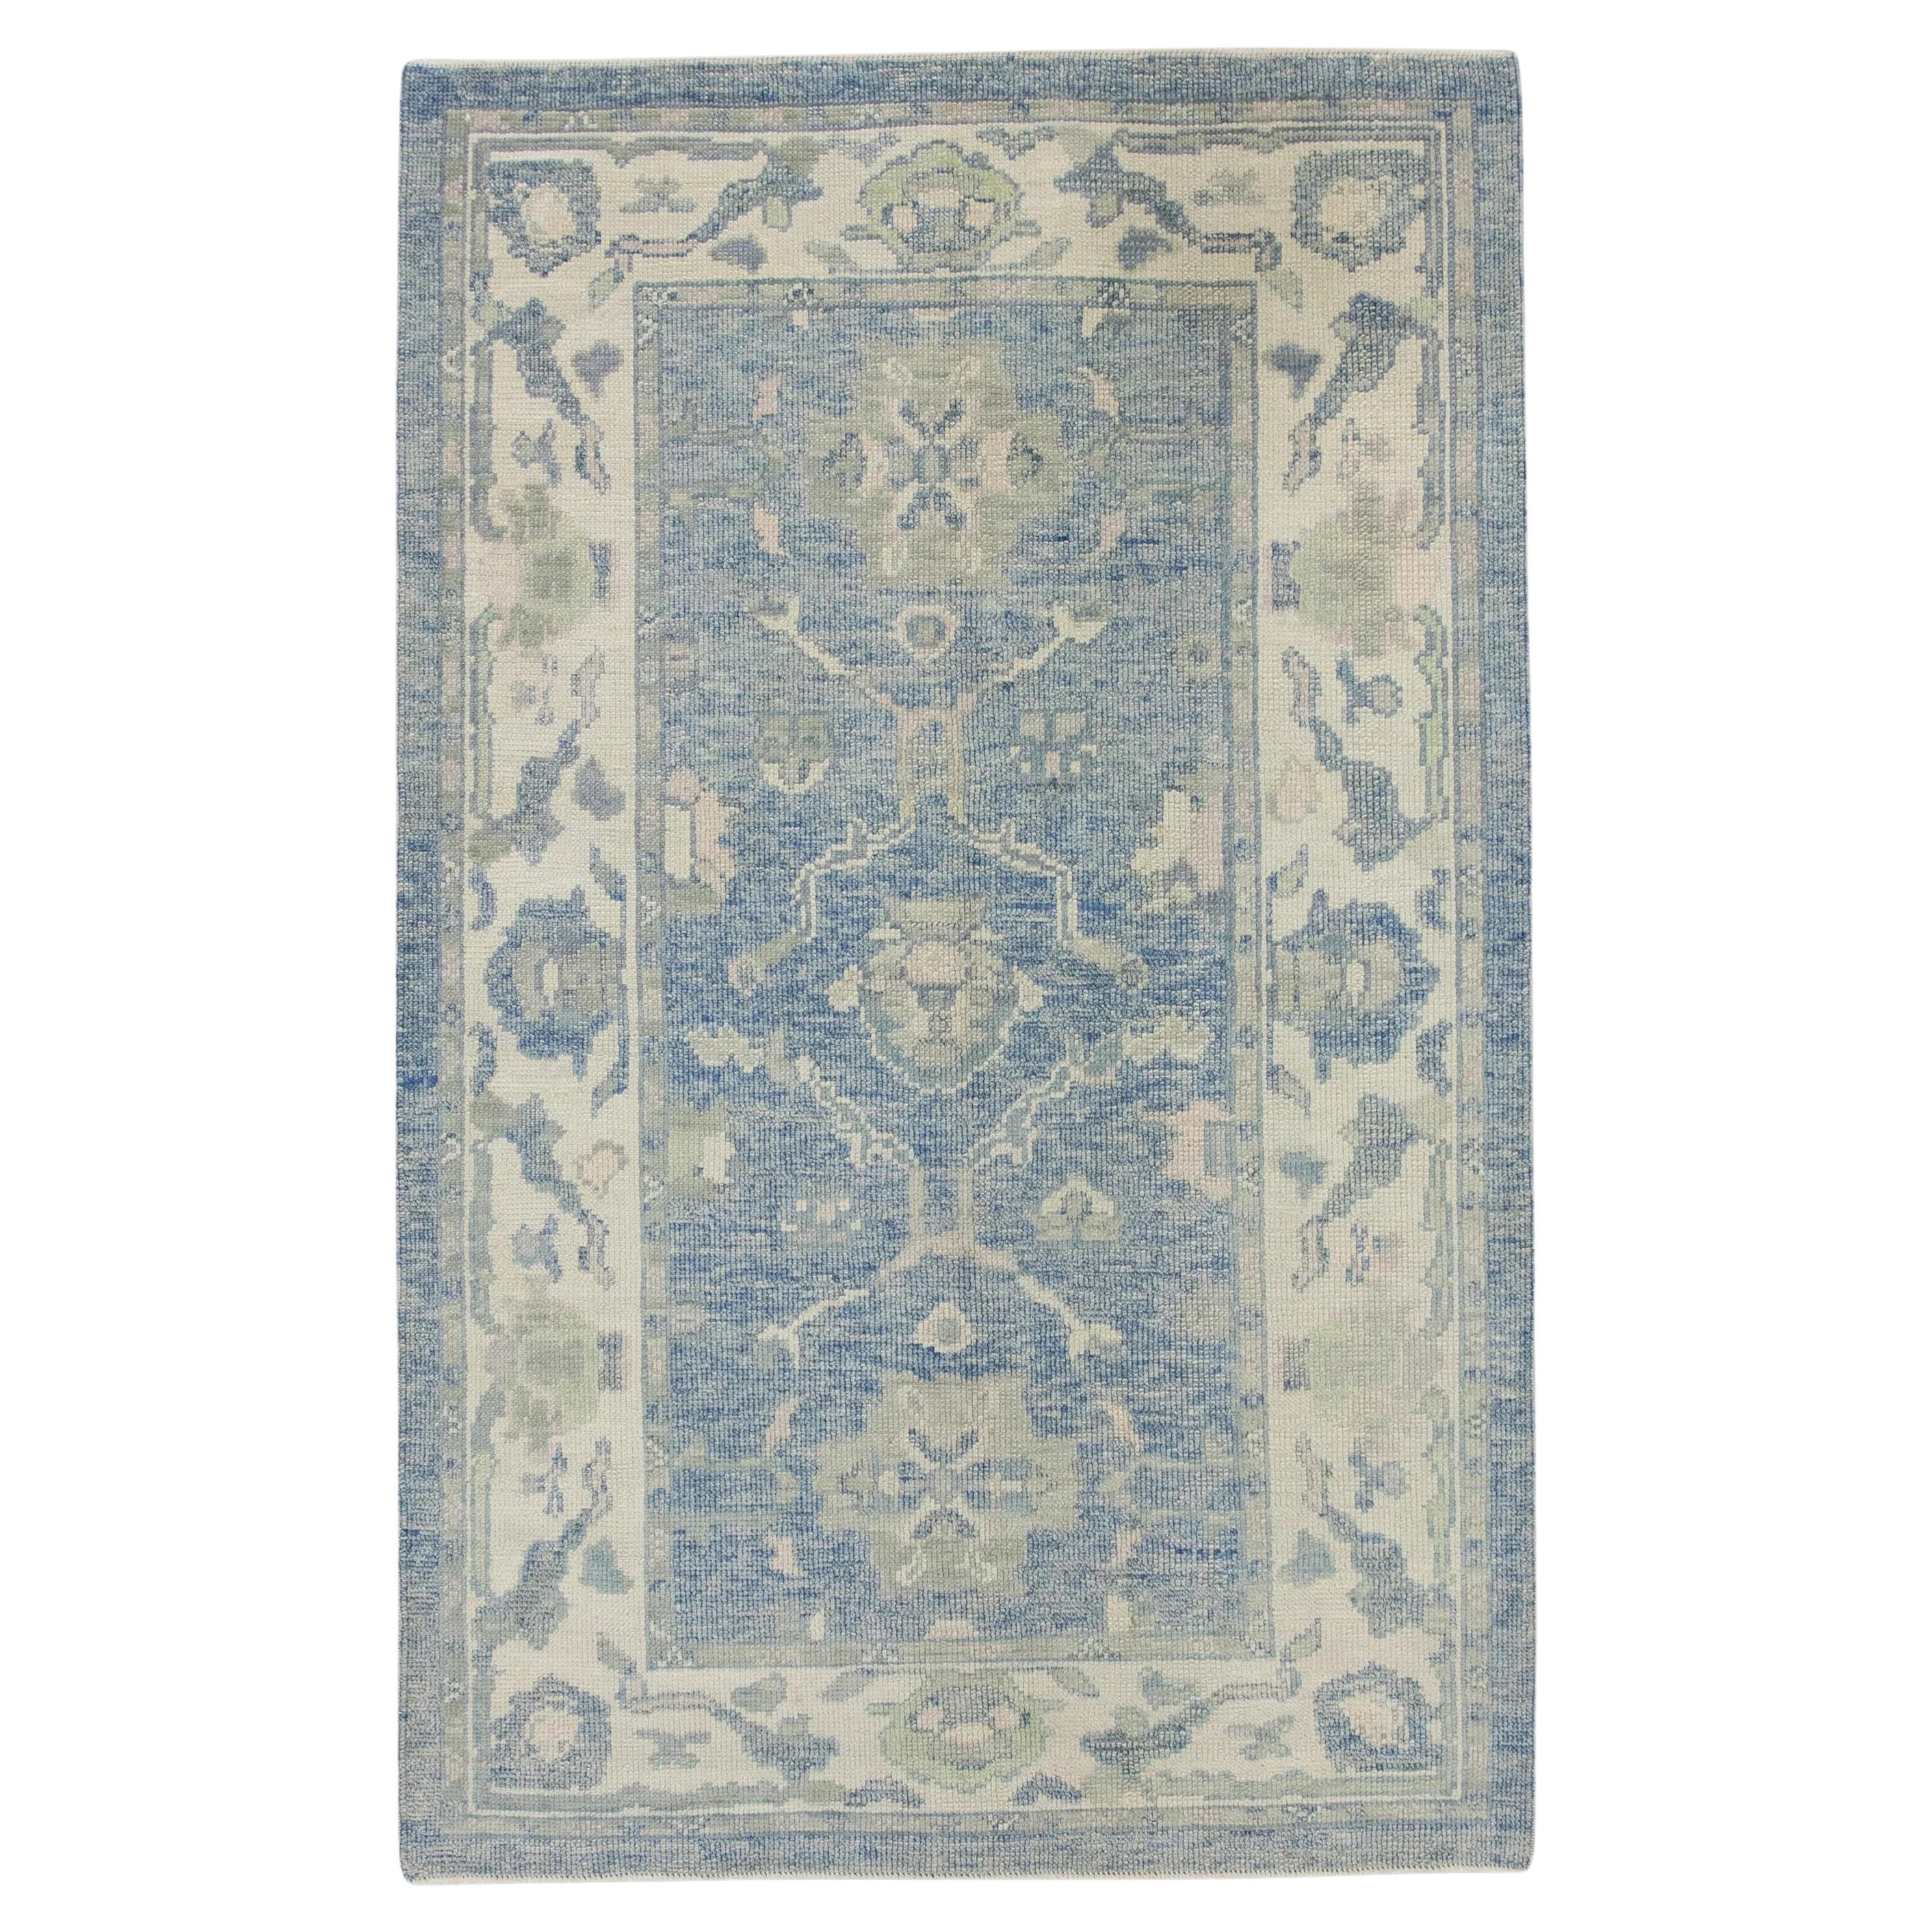 Blue Handwoven Wool Turkish Oushak Rug with Green Floral Pattern 4'1" x 6'5"